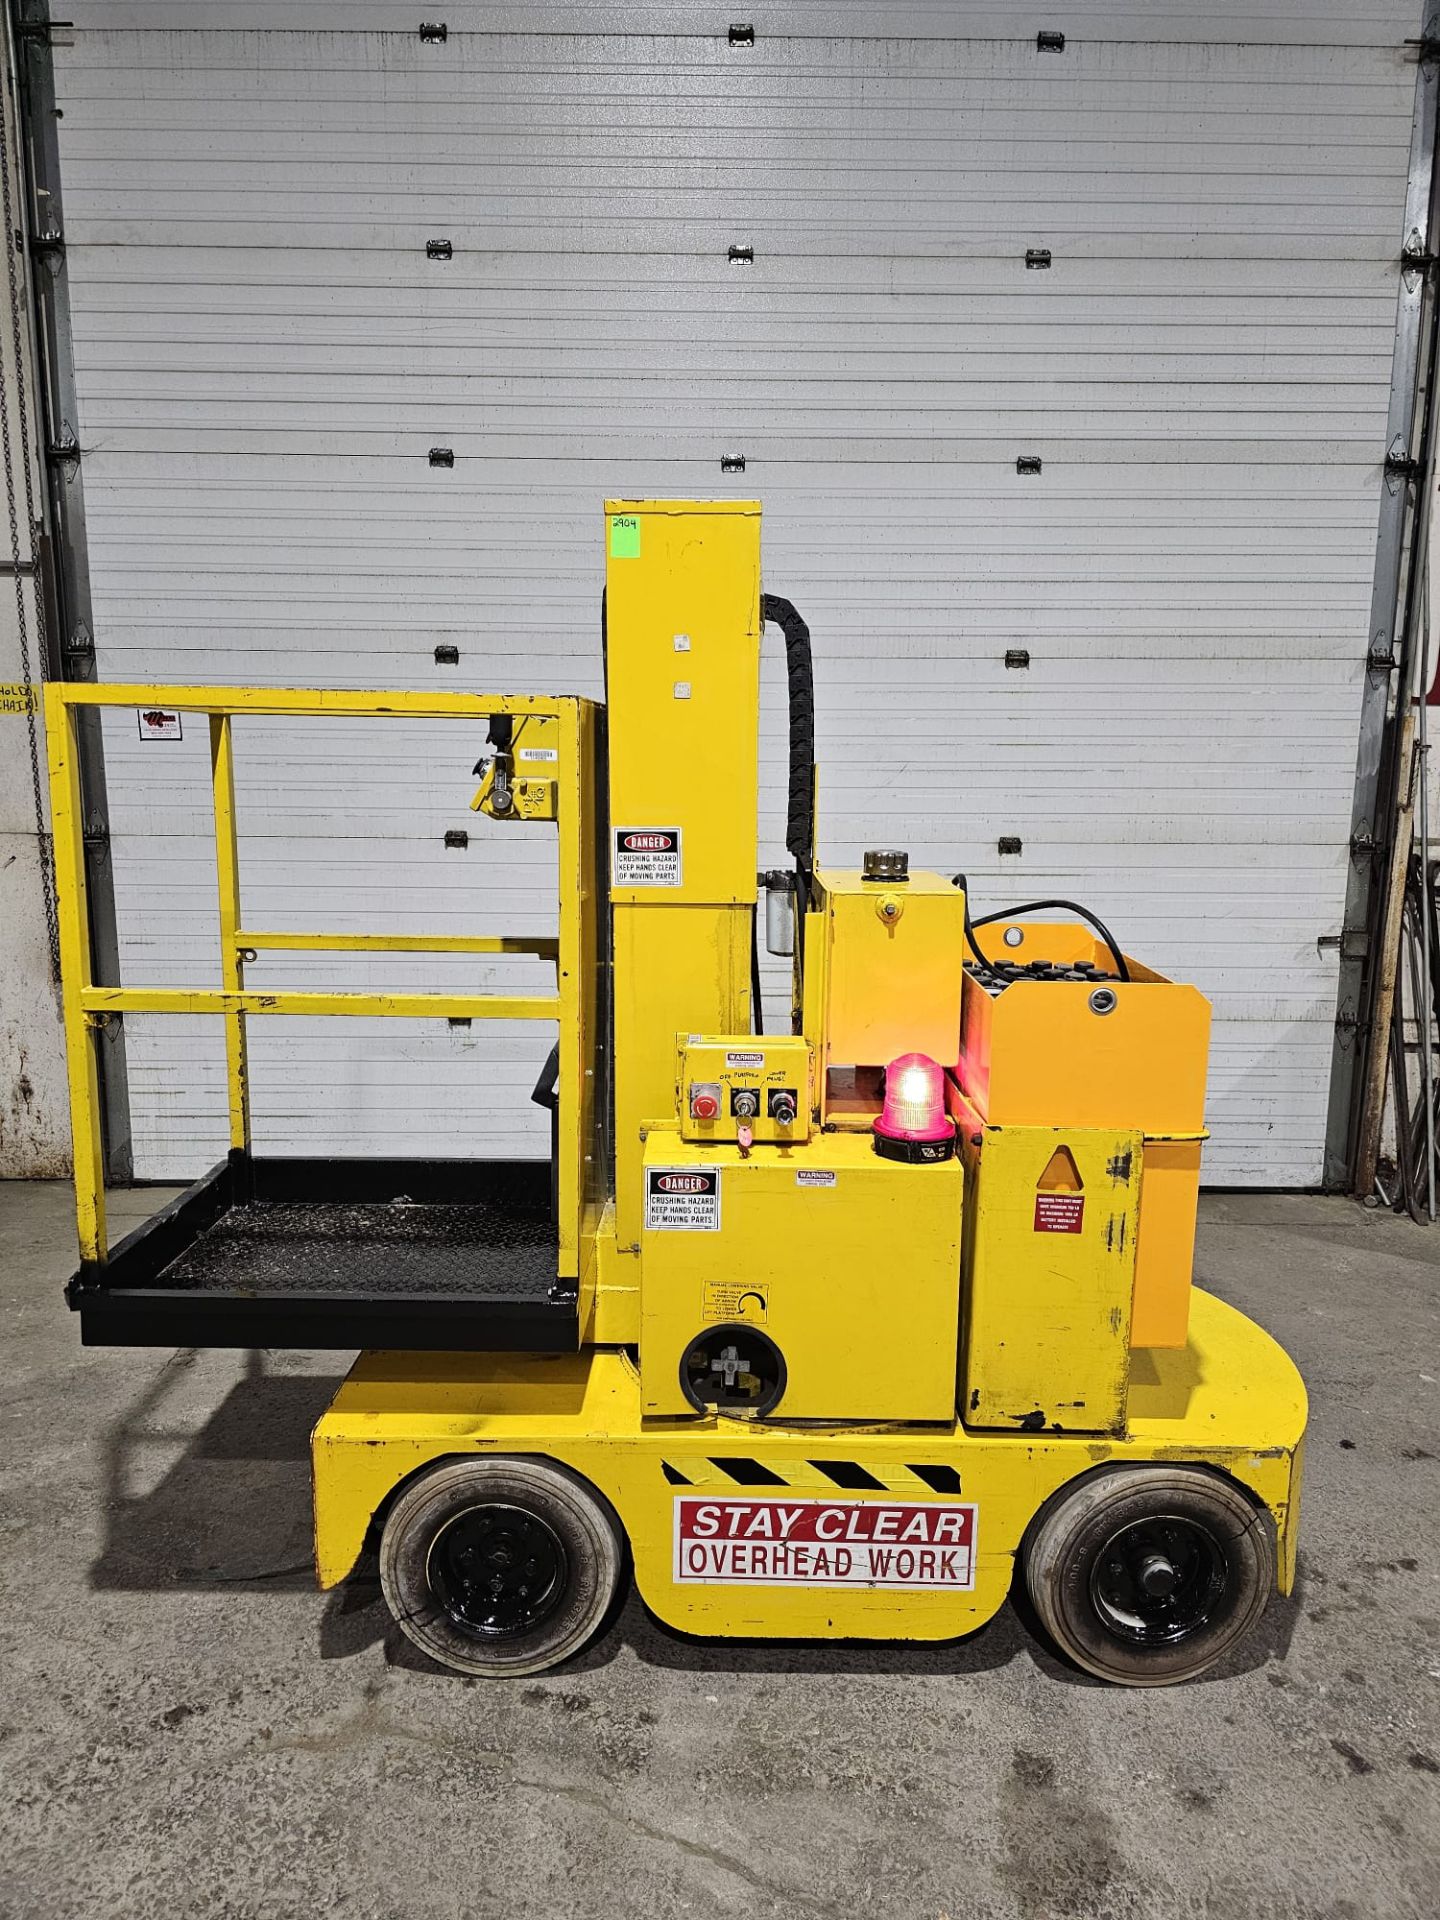 Lift-A-Loft ManLift - 15' Lift Height BRAND NEW 24V Battery with 300lbs Capacity - Image 2 of 8